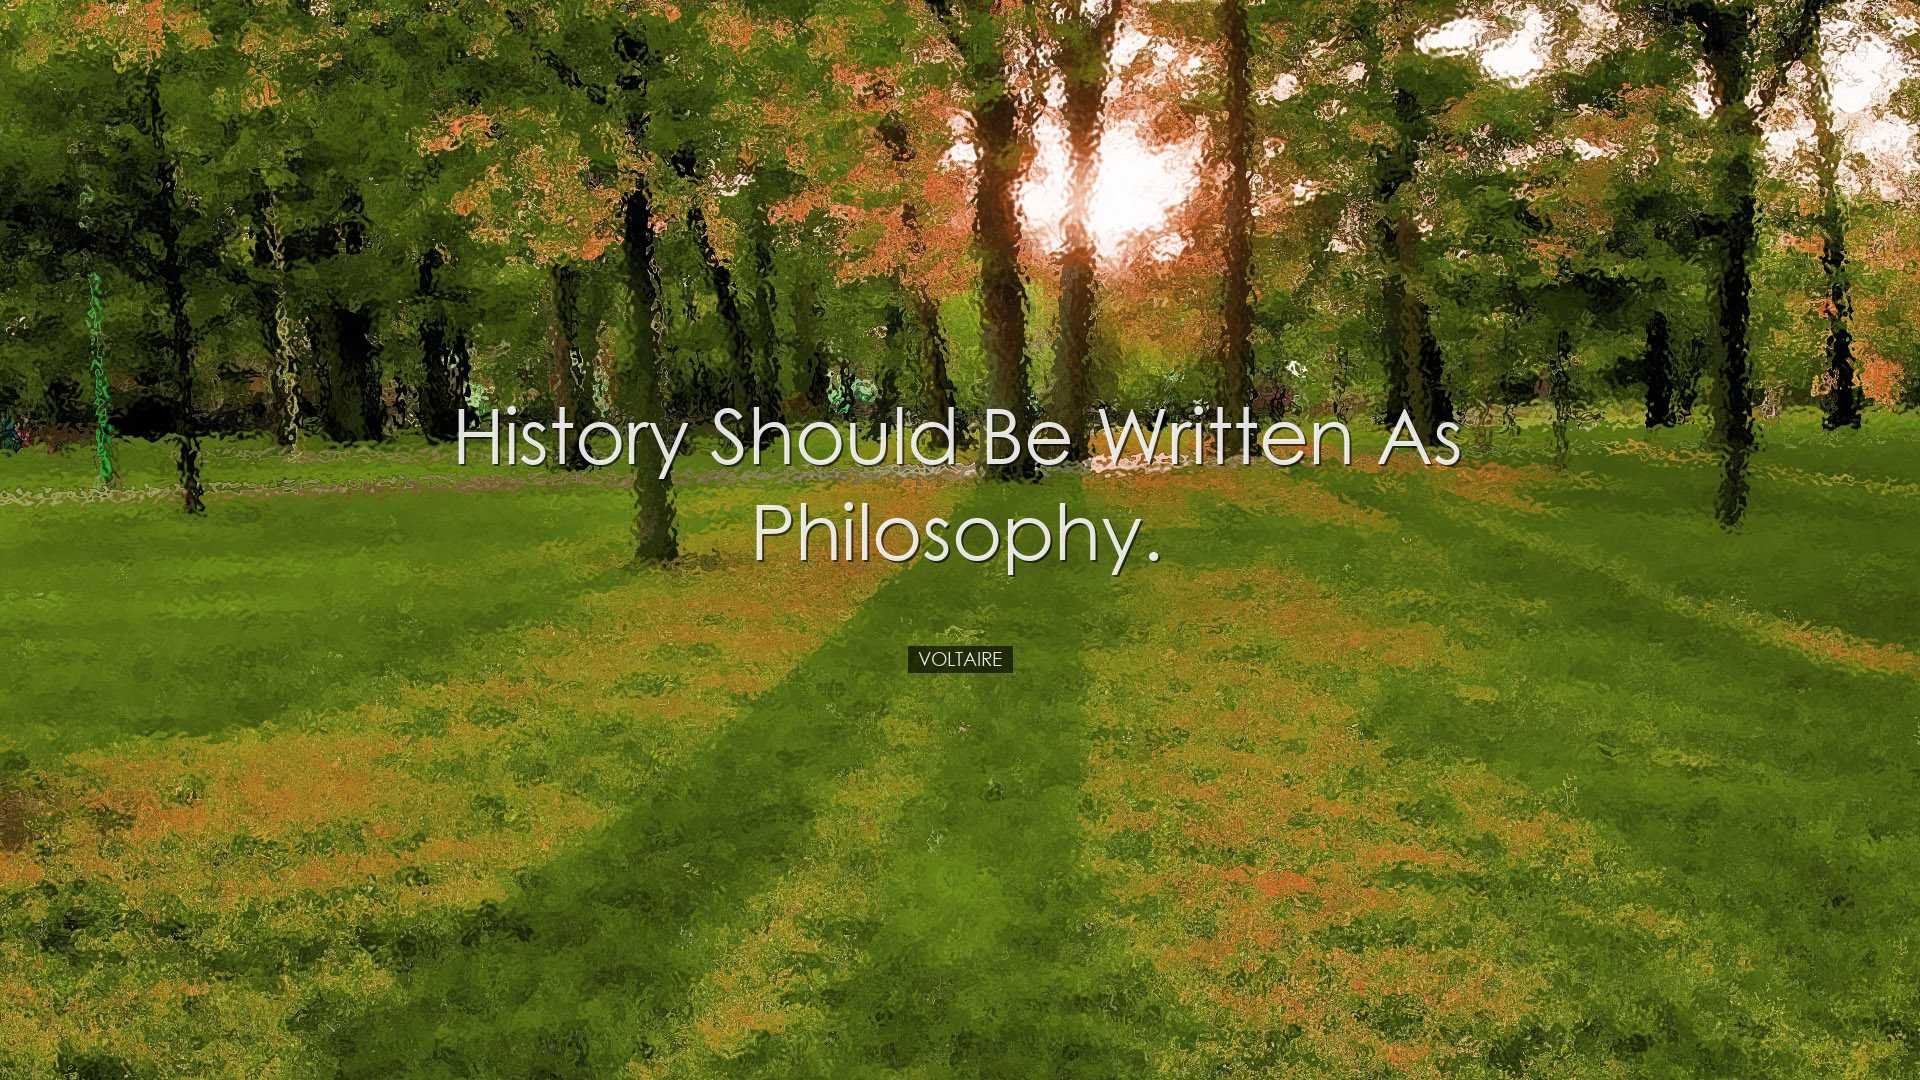 History should be written as philosophy. - Voltaire